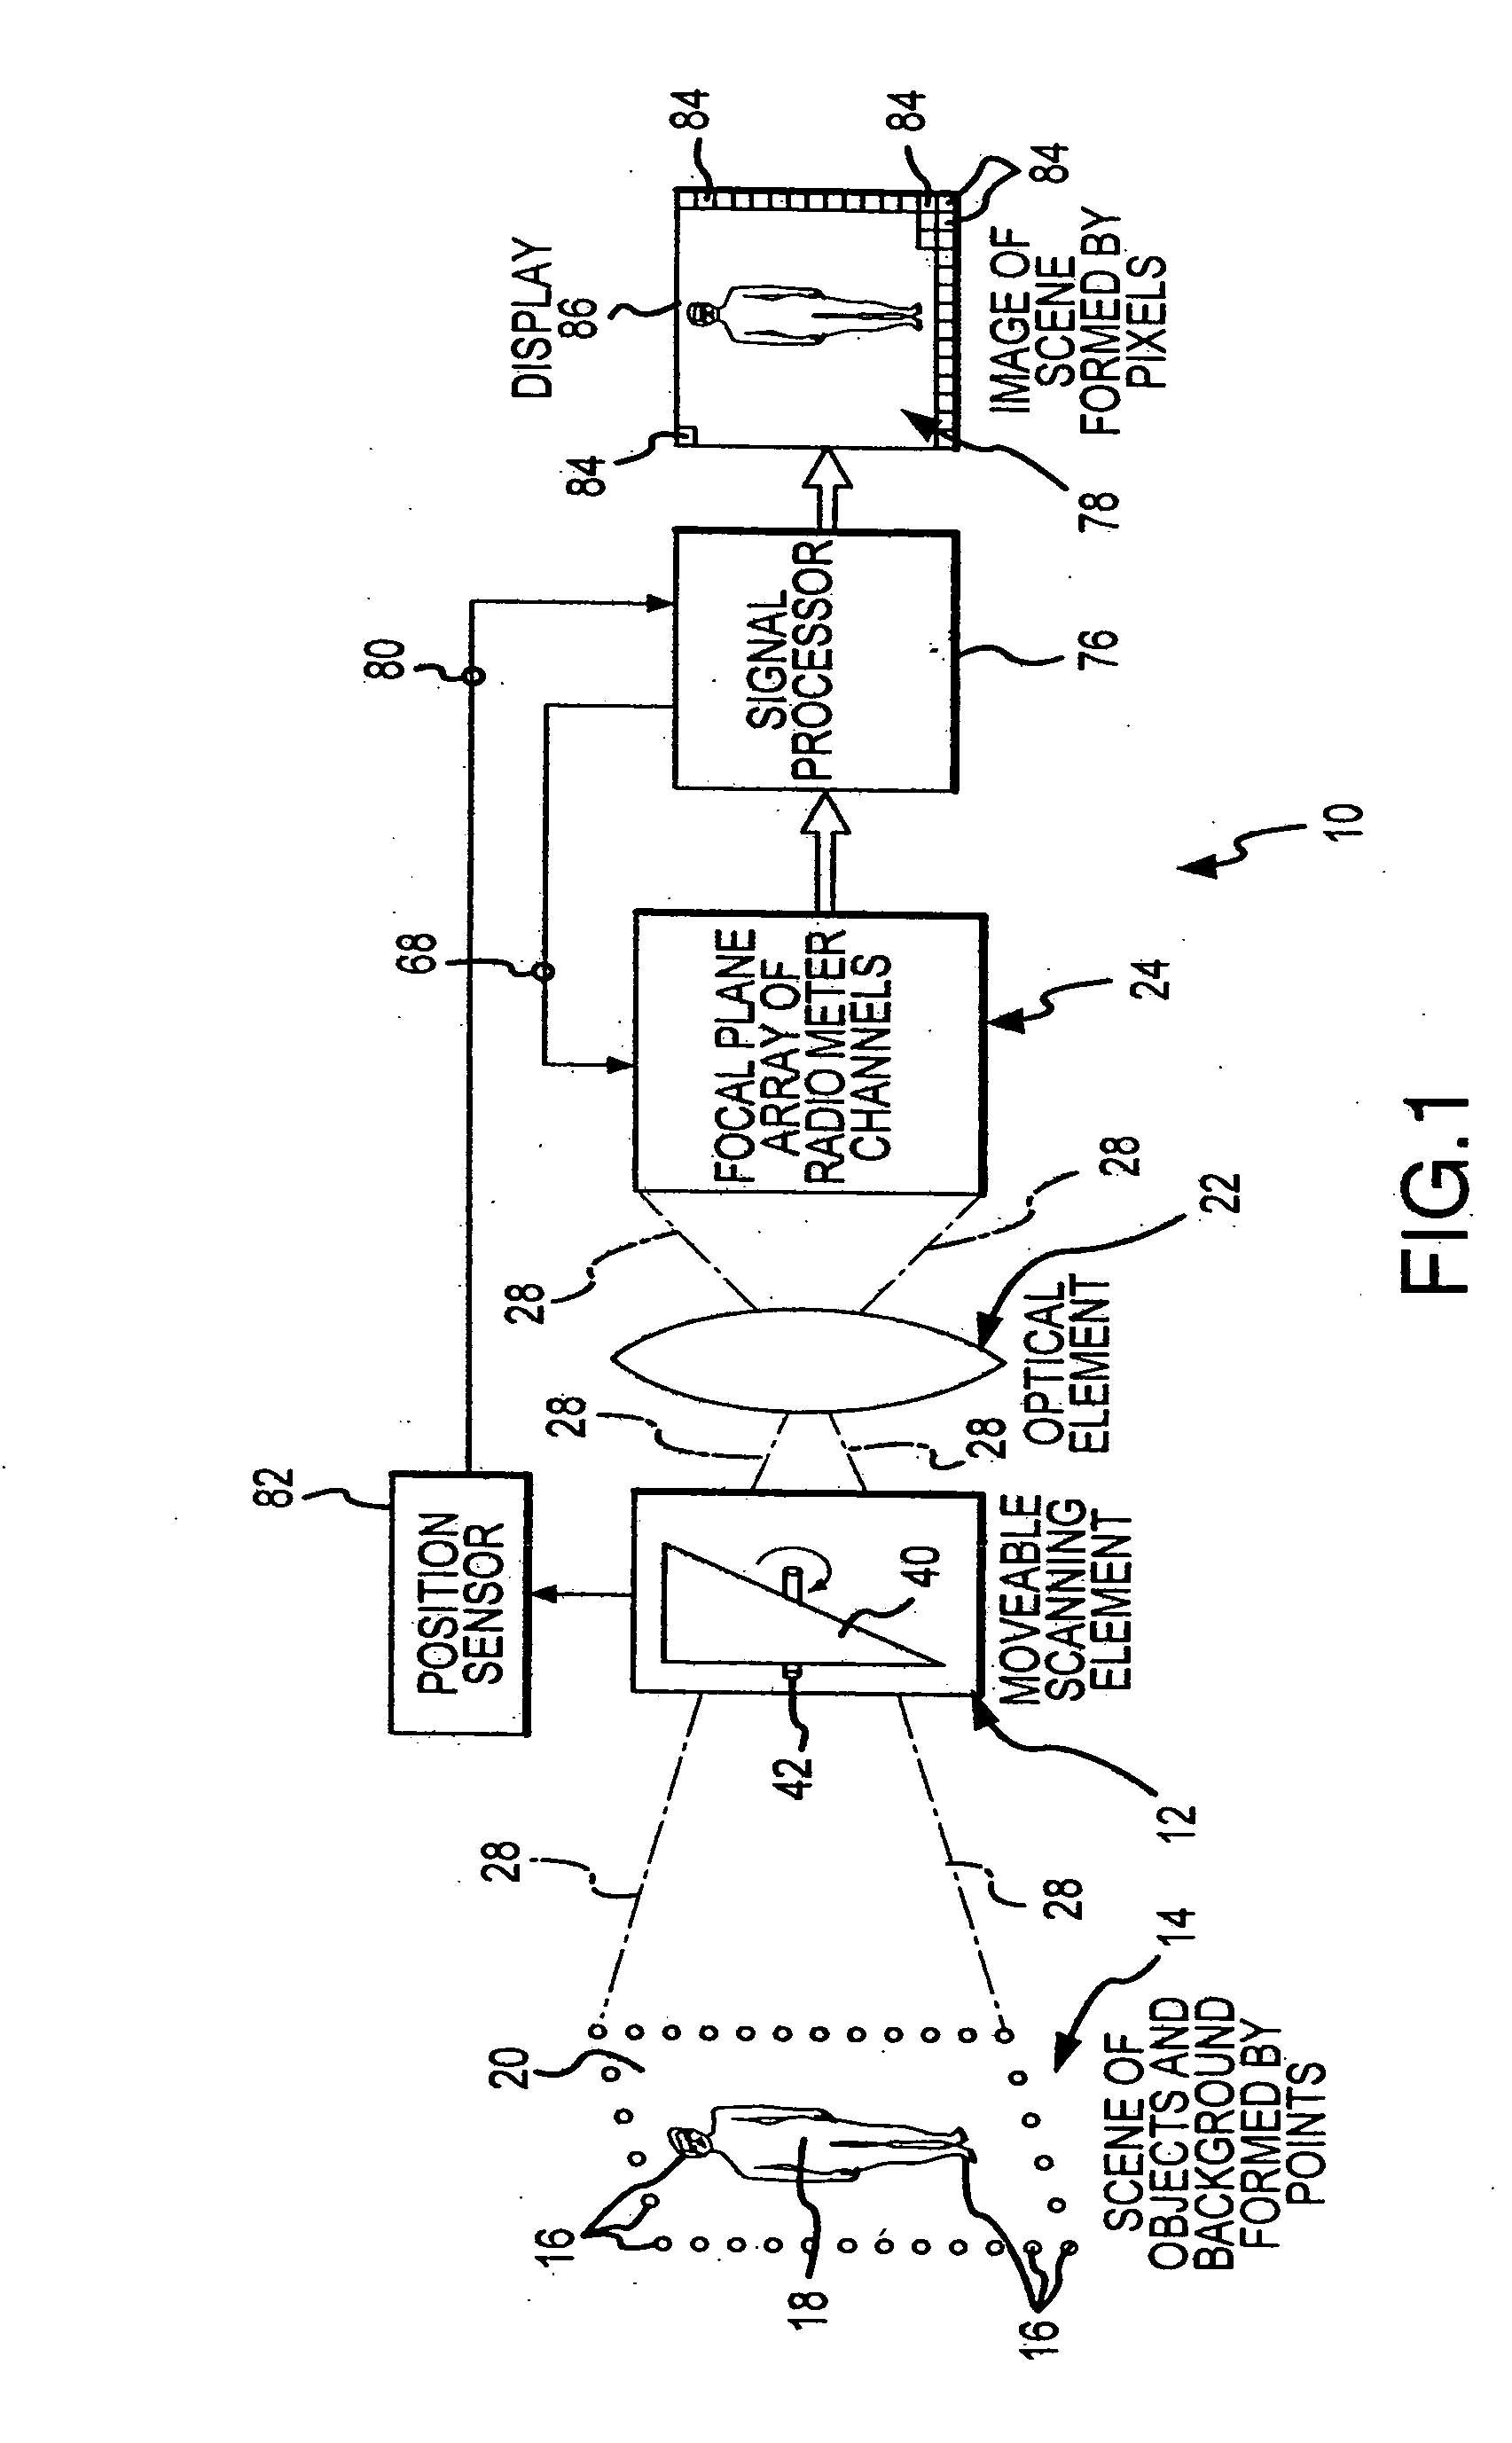 Weighted noise compensating method and camera used in millimeter wave imaging